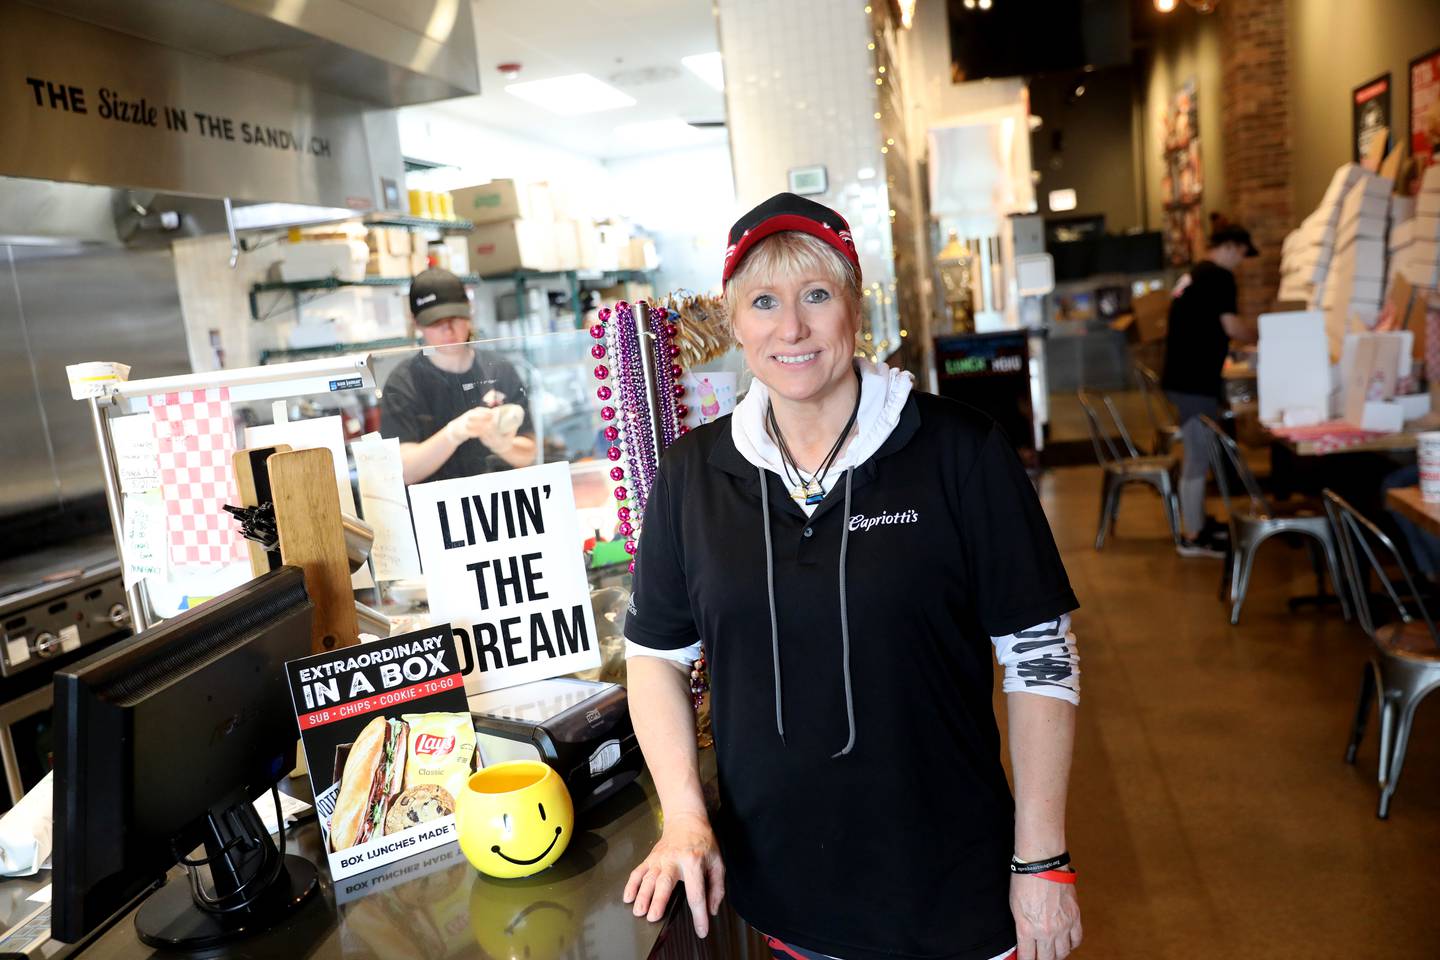 Capriotti's Sandwich Shop franchise owner and chef Gina Chiovino donated and delivered food to the firefighters who spent long hours on Saturday, May 21 battling the fire at the former Pheasant Run Resort in St. Charles.